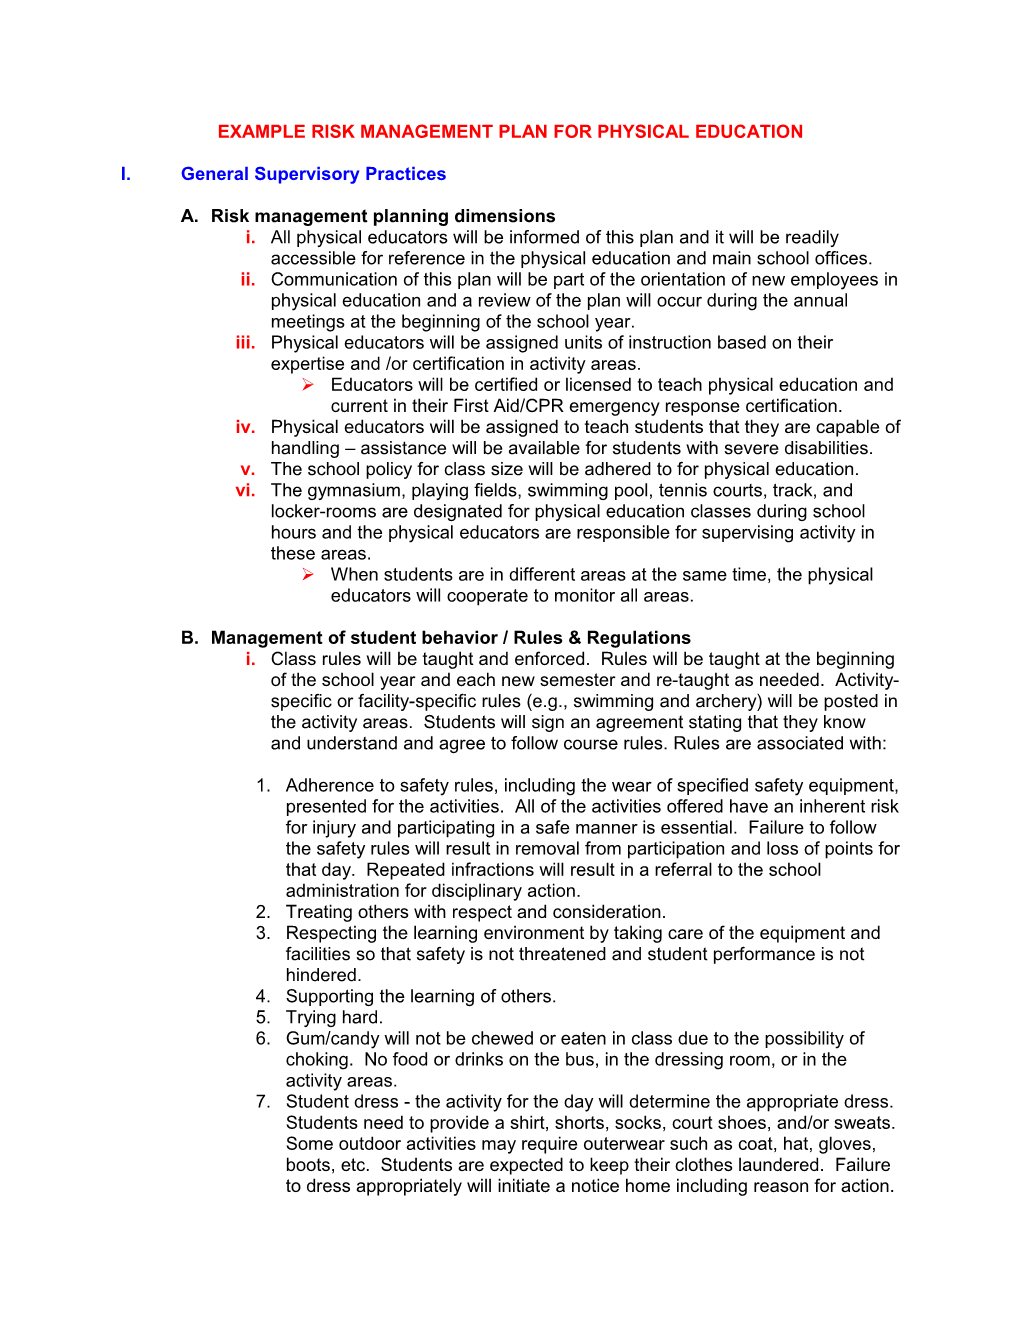 Example Risk Management Plan for Physical Education s1